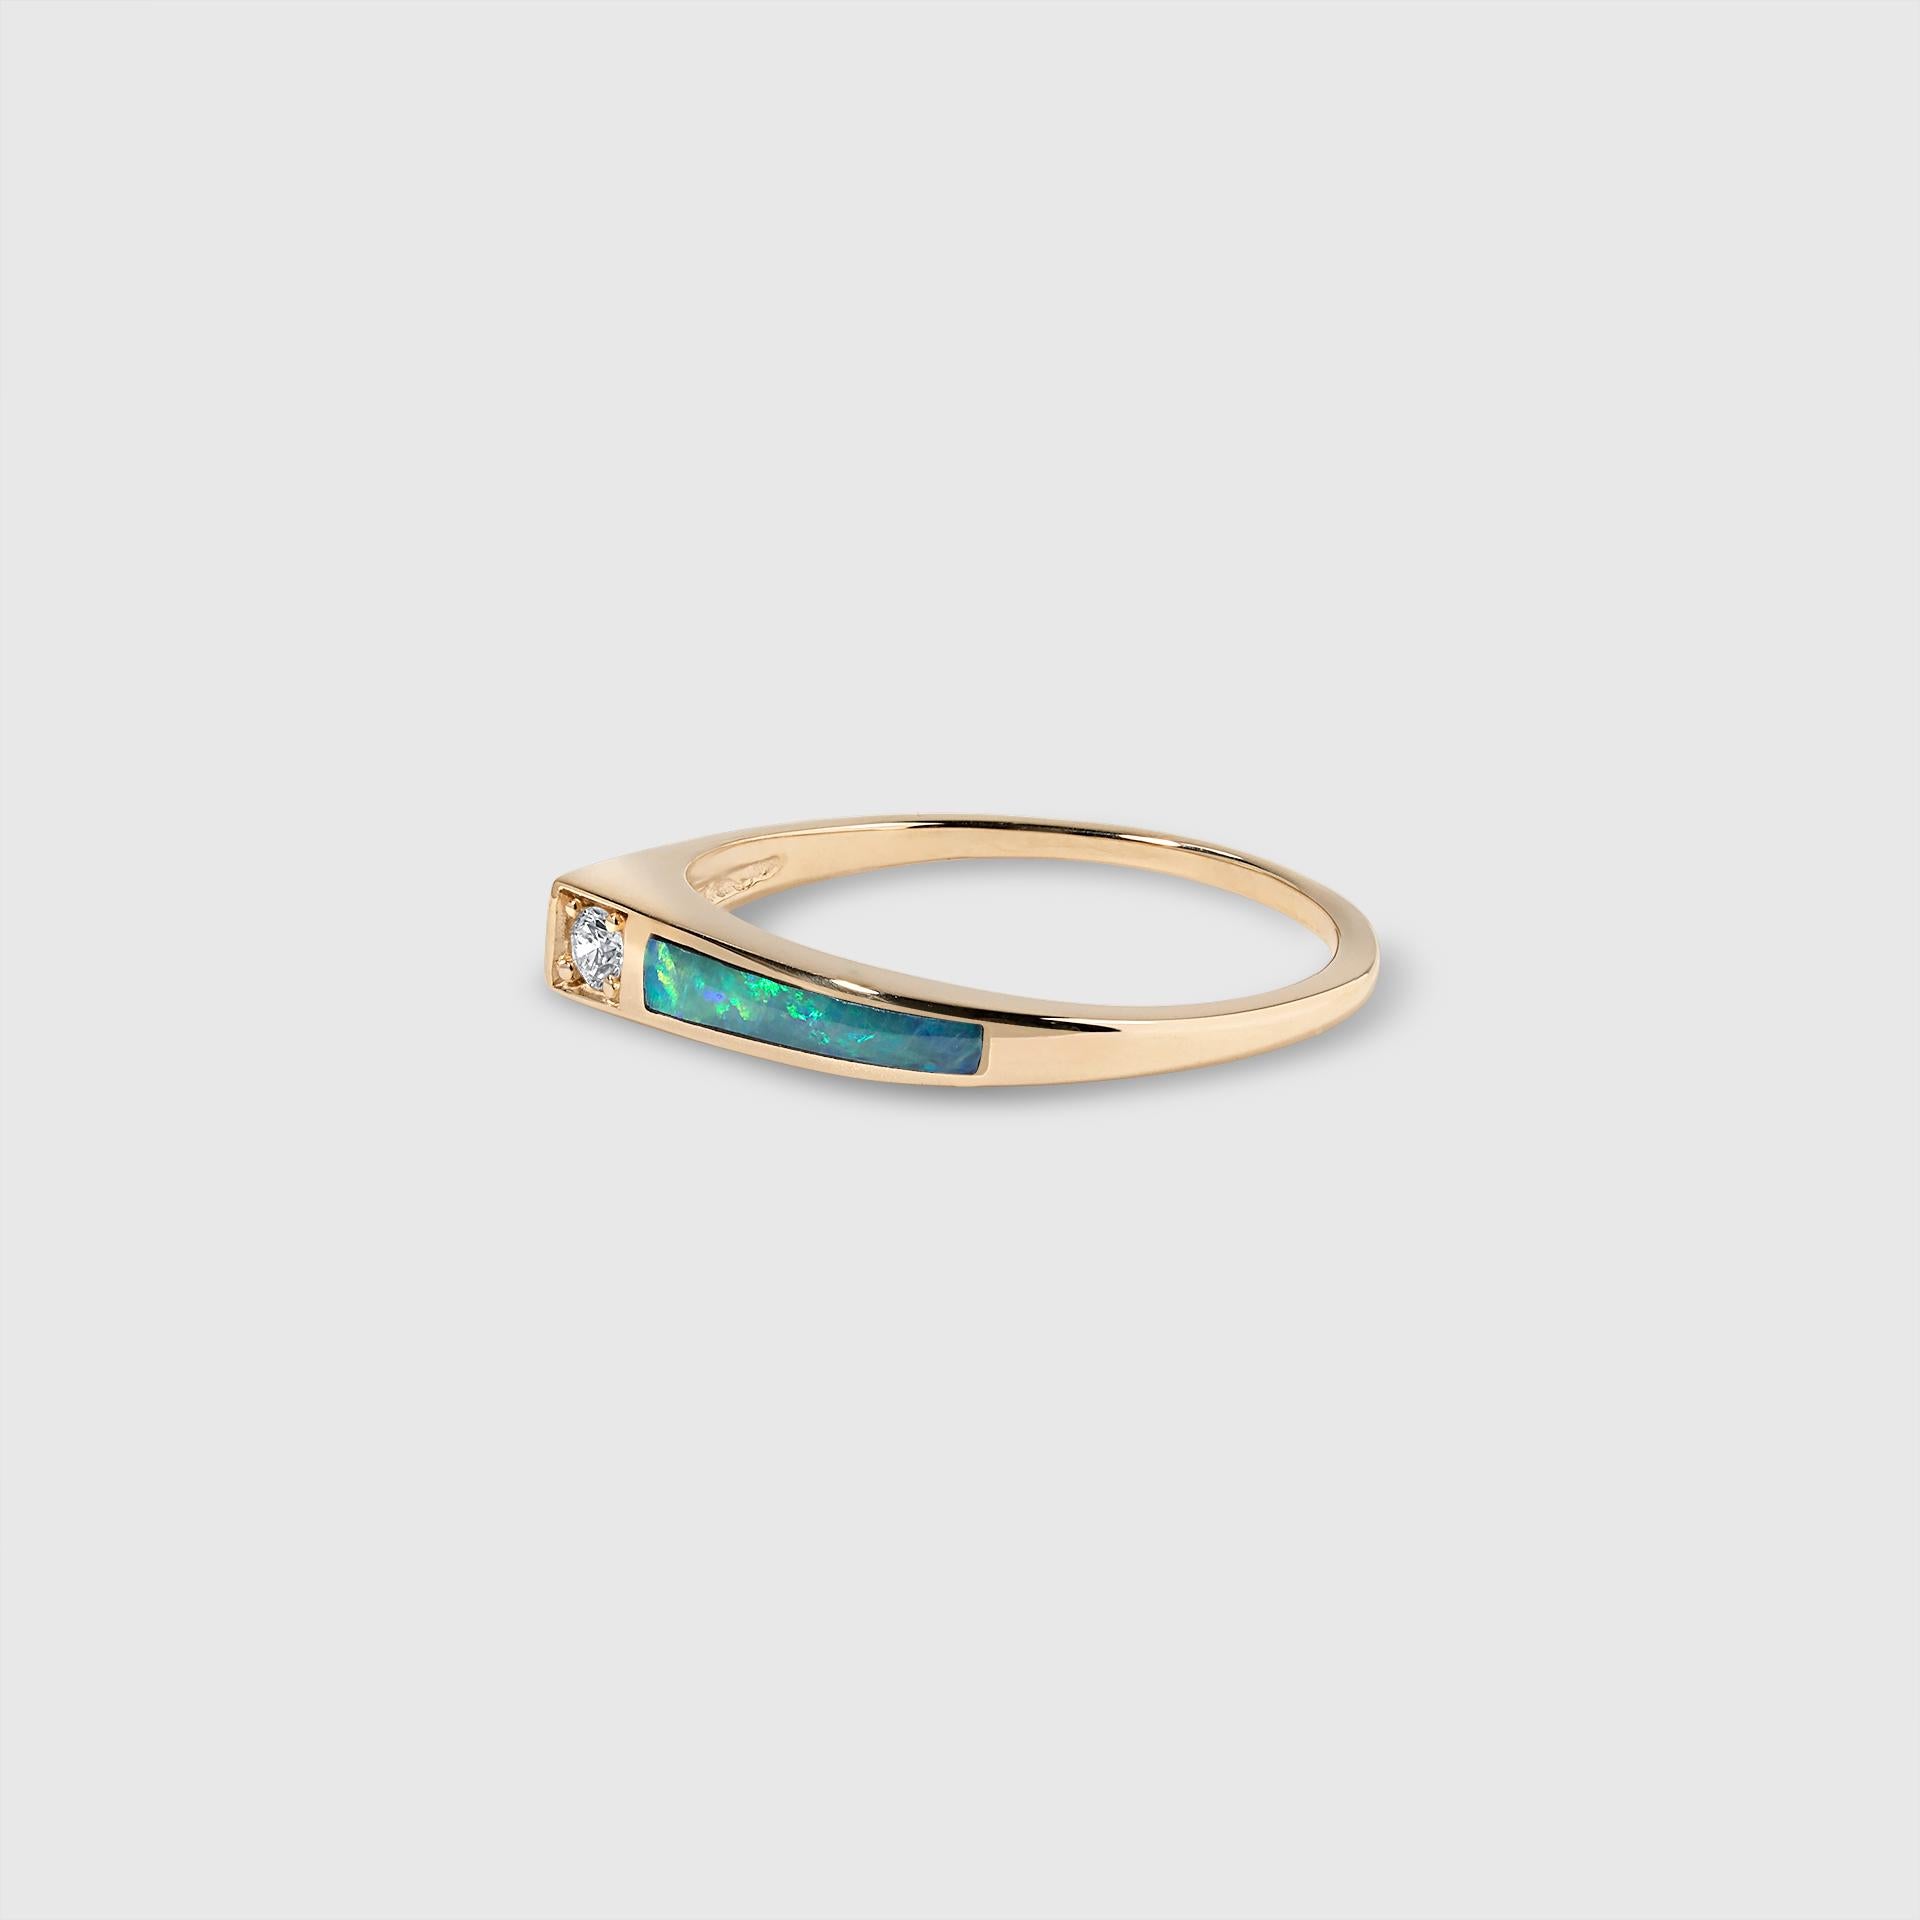 Opal Stacker Ring with Side Diamond Detail, 14kt Yellow Gold, size 7 in stock, custom sizes are available.

All designs may be custom-ordered in many of Kabana’s stones, including: sleeping beauty turquoise, turquoise, four-star opal,